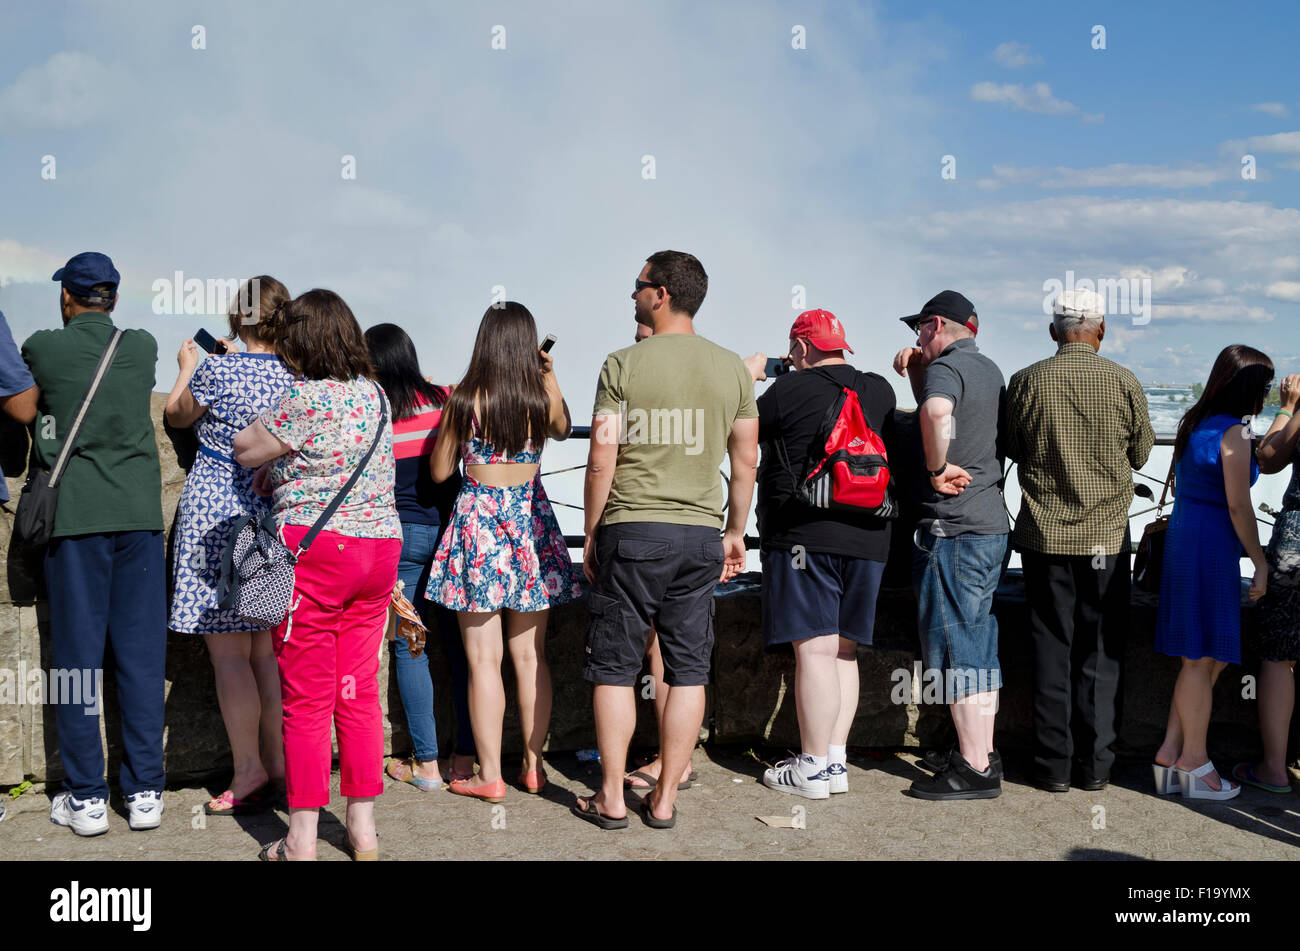 Crowds of tourists watch and take photos of Niagara Falls from the Canadian side. Group of people viewing the Horseshoe Falls. Stock Photo